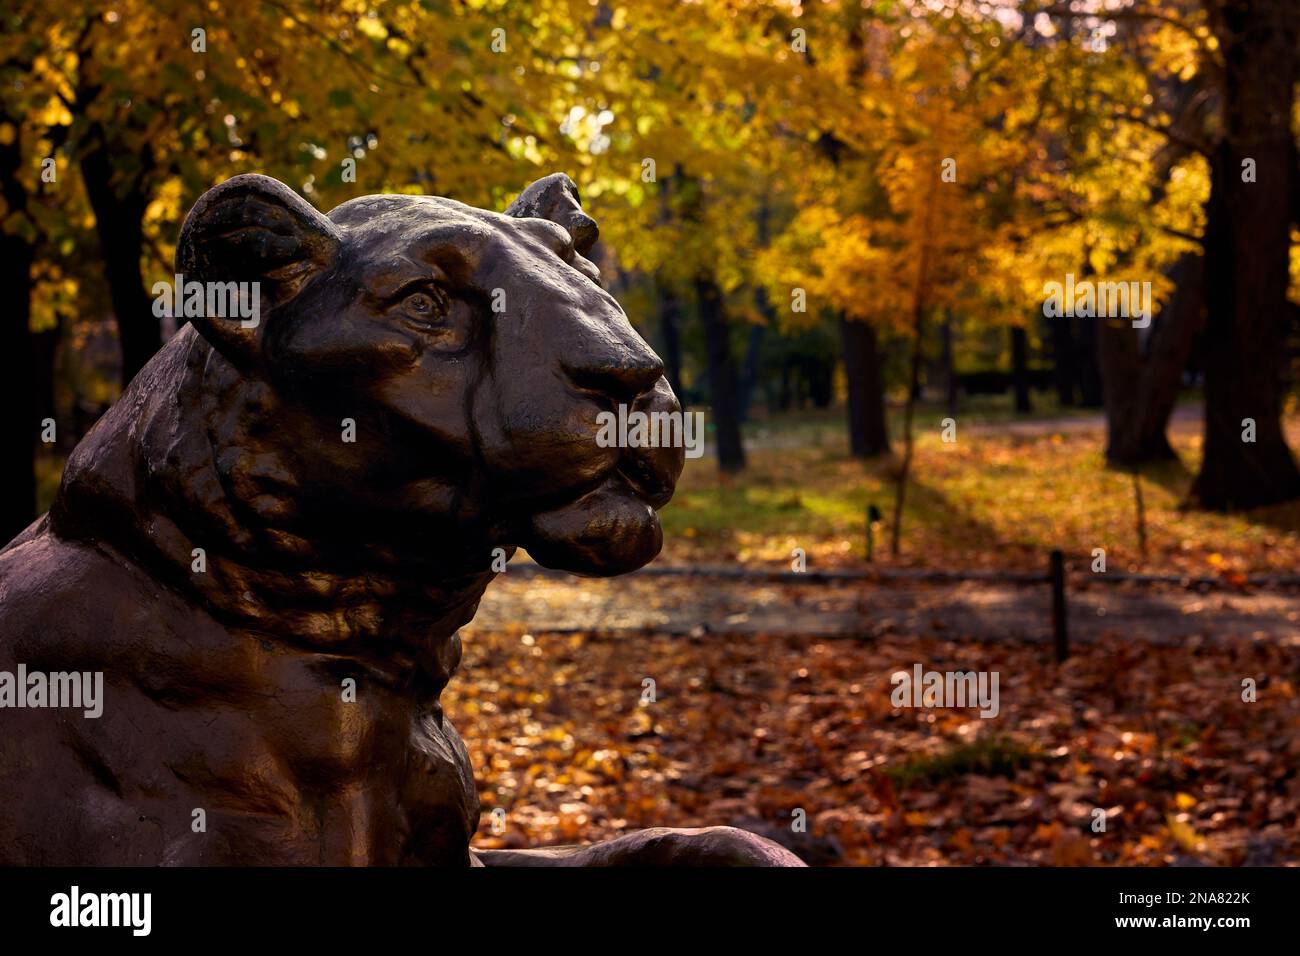 The head of the lion monument in the city park against the background of autumn yellow foliage. Odessa Ukraine. Stock Photo